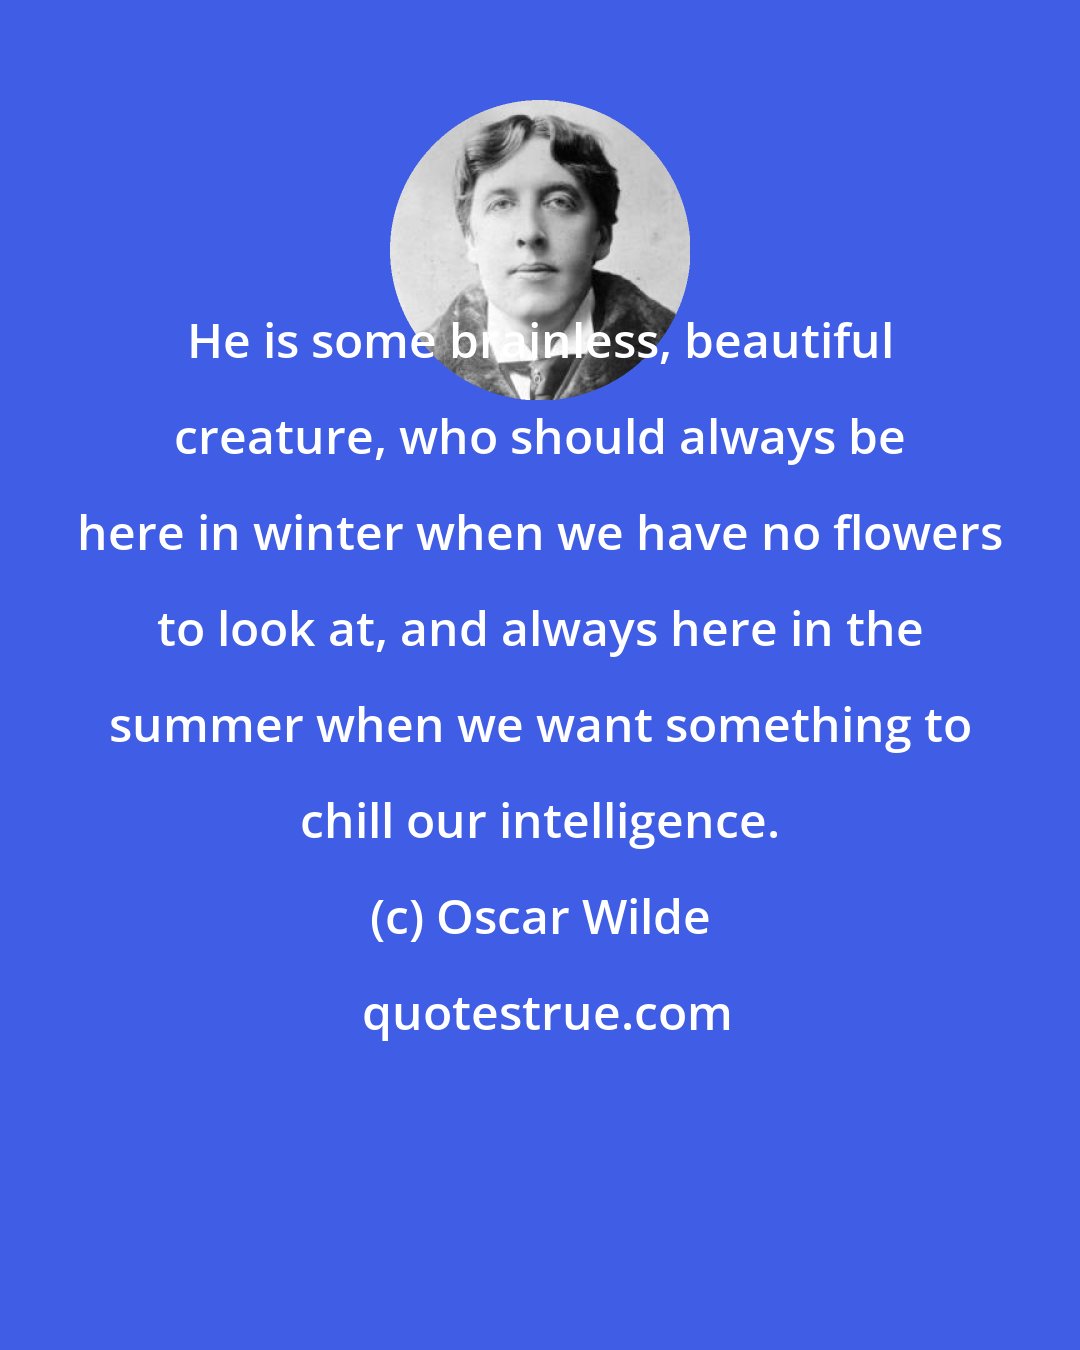 Oscar Wilde: He is some brainless, beautiful creature, who should always be here in winter when we have no flowers to look at, and always here in the summer when we want something to chill our intelligence.